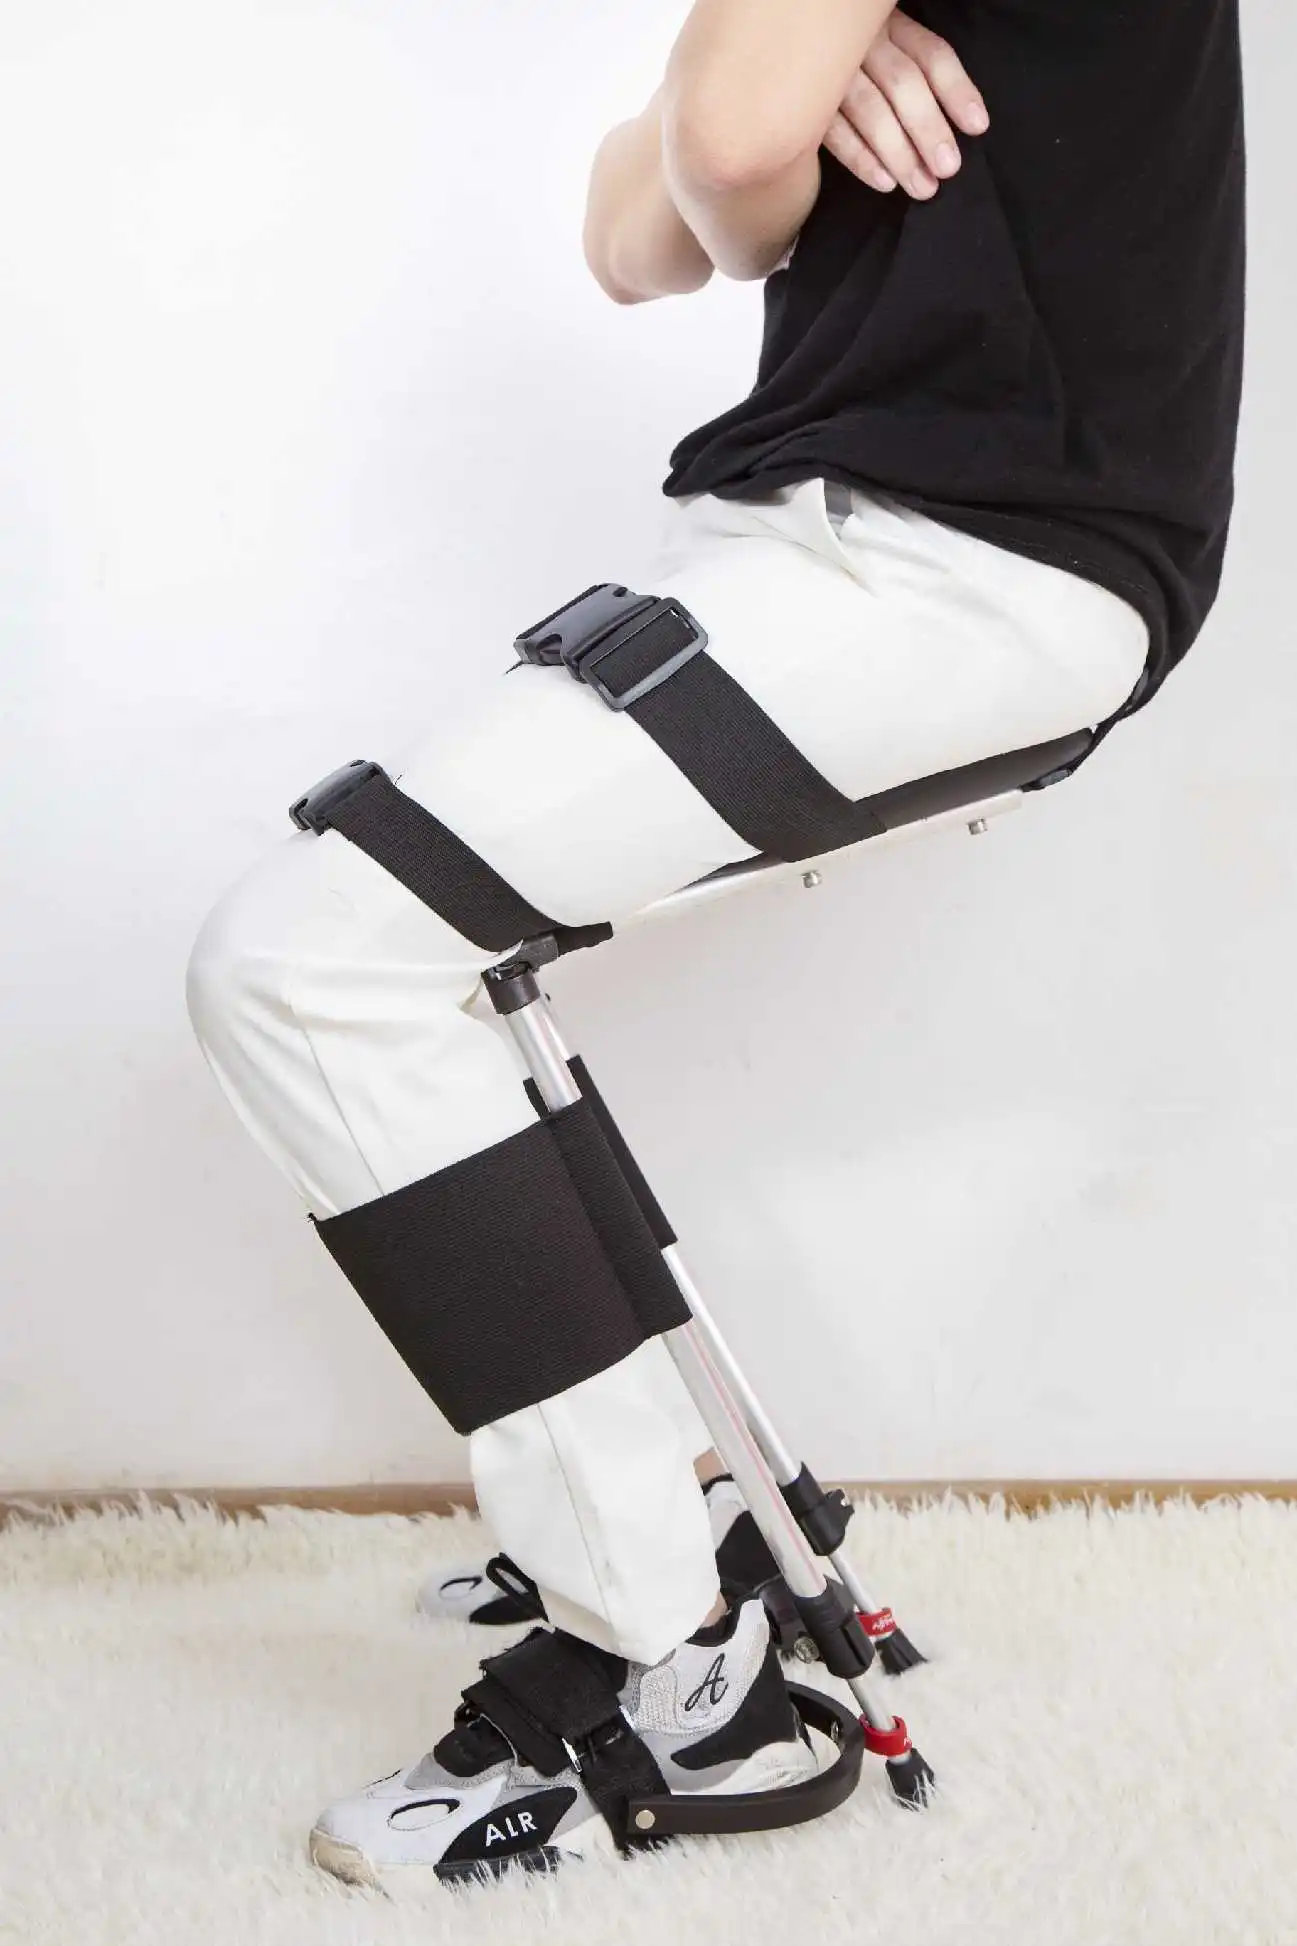 High Quality Adjustable Chairless Chair Wearable Invisible Chair Buy Ergonomics Chair Wearable Invisible Chair Assembly Line Workshop Work Chair Skeleton Chair Product On Alibaba Com